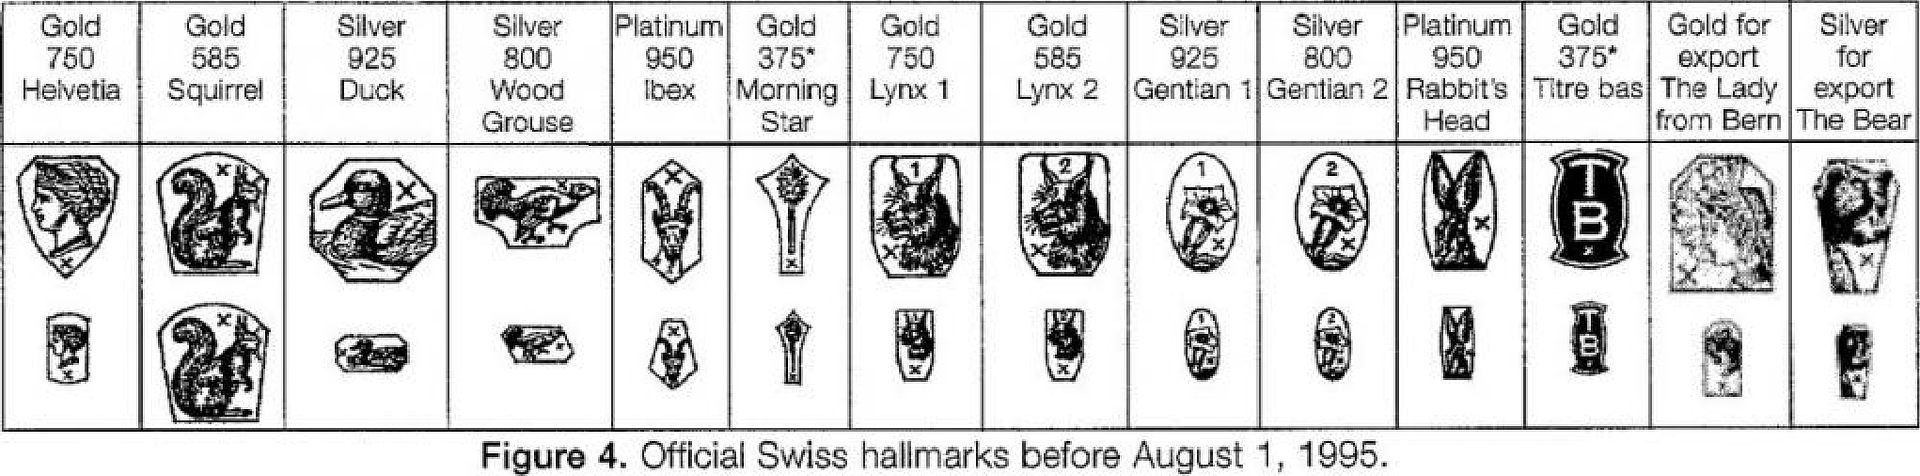  Rolex assay chart for stampings made before August 1st, 1995